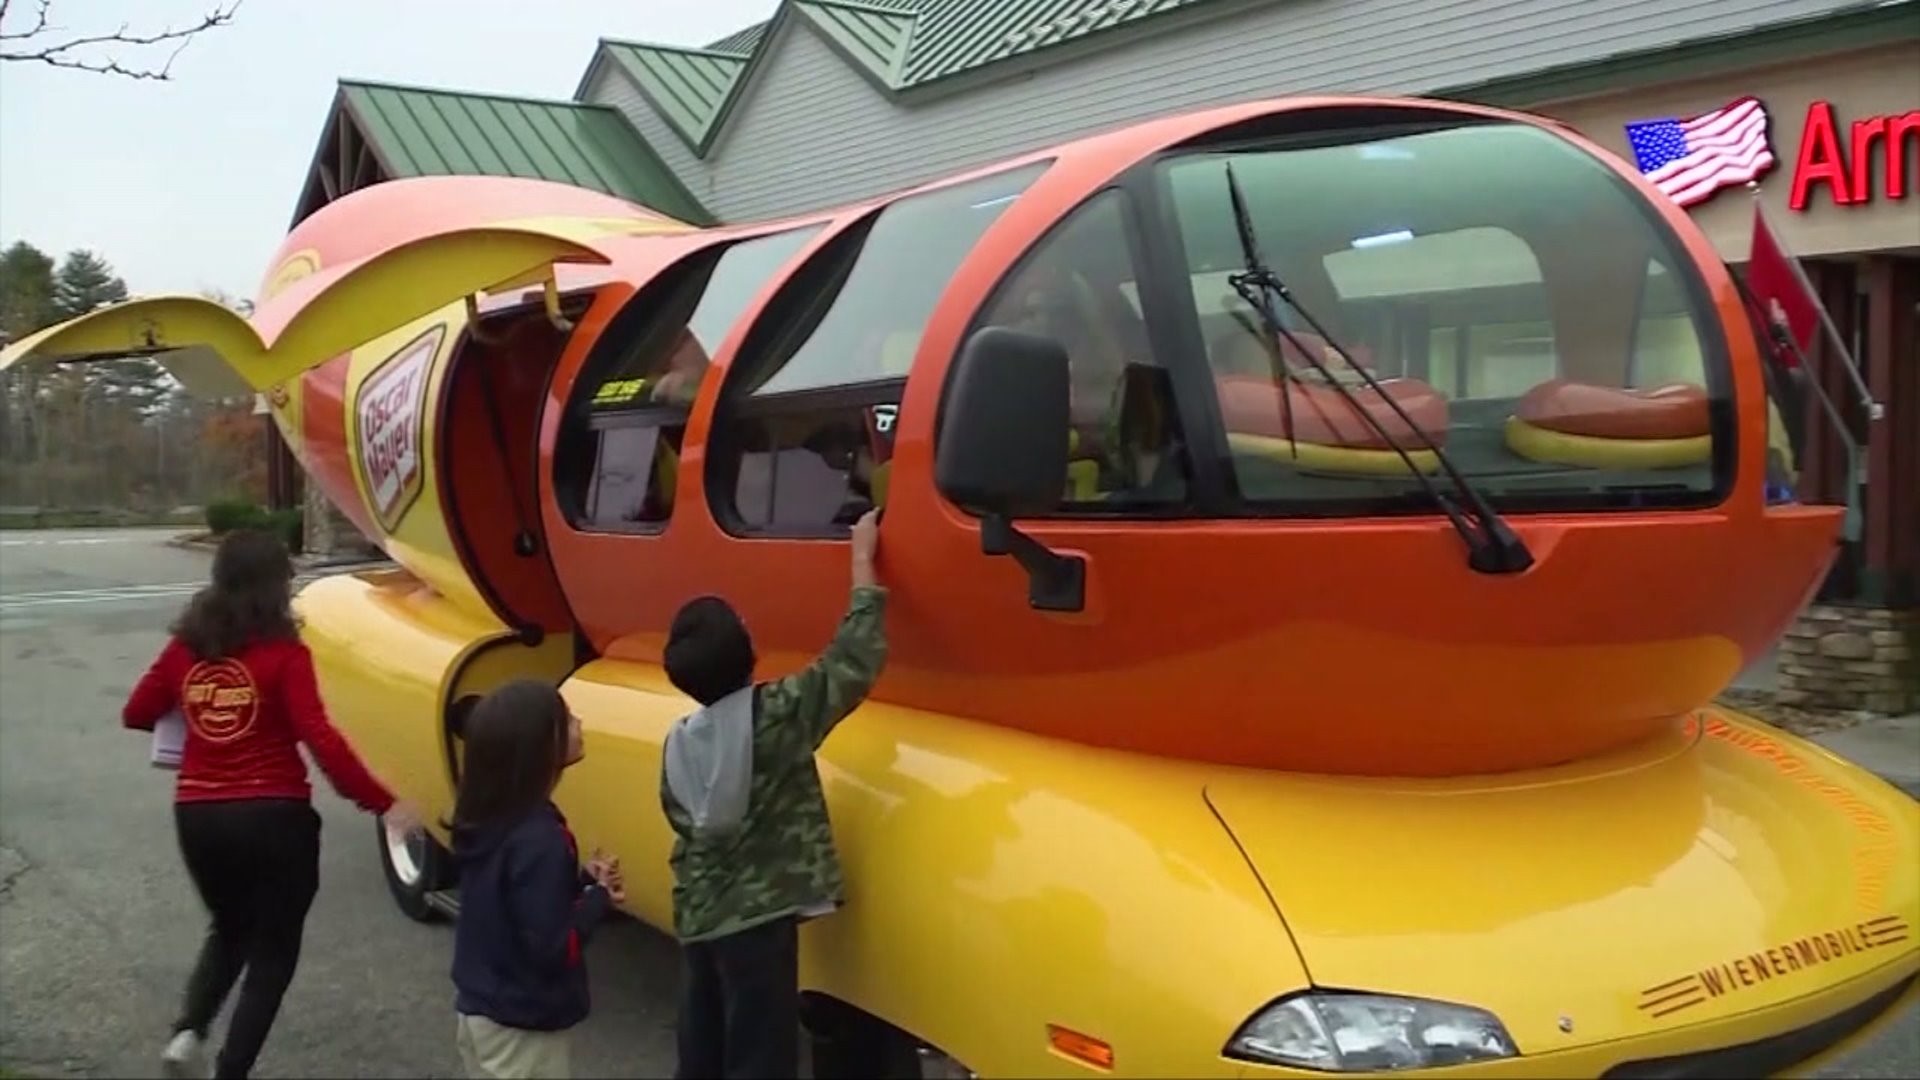 The iconic hot dog-shaped vehicle will visit Lancaster and Mount Joy this weekend.